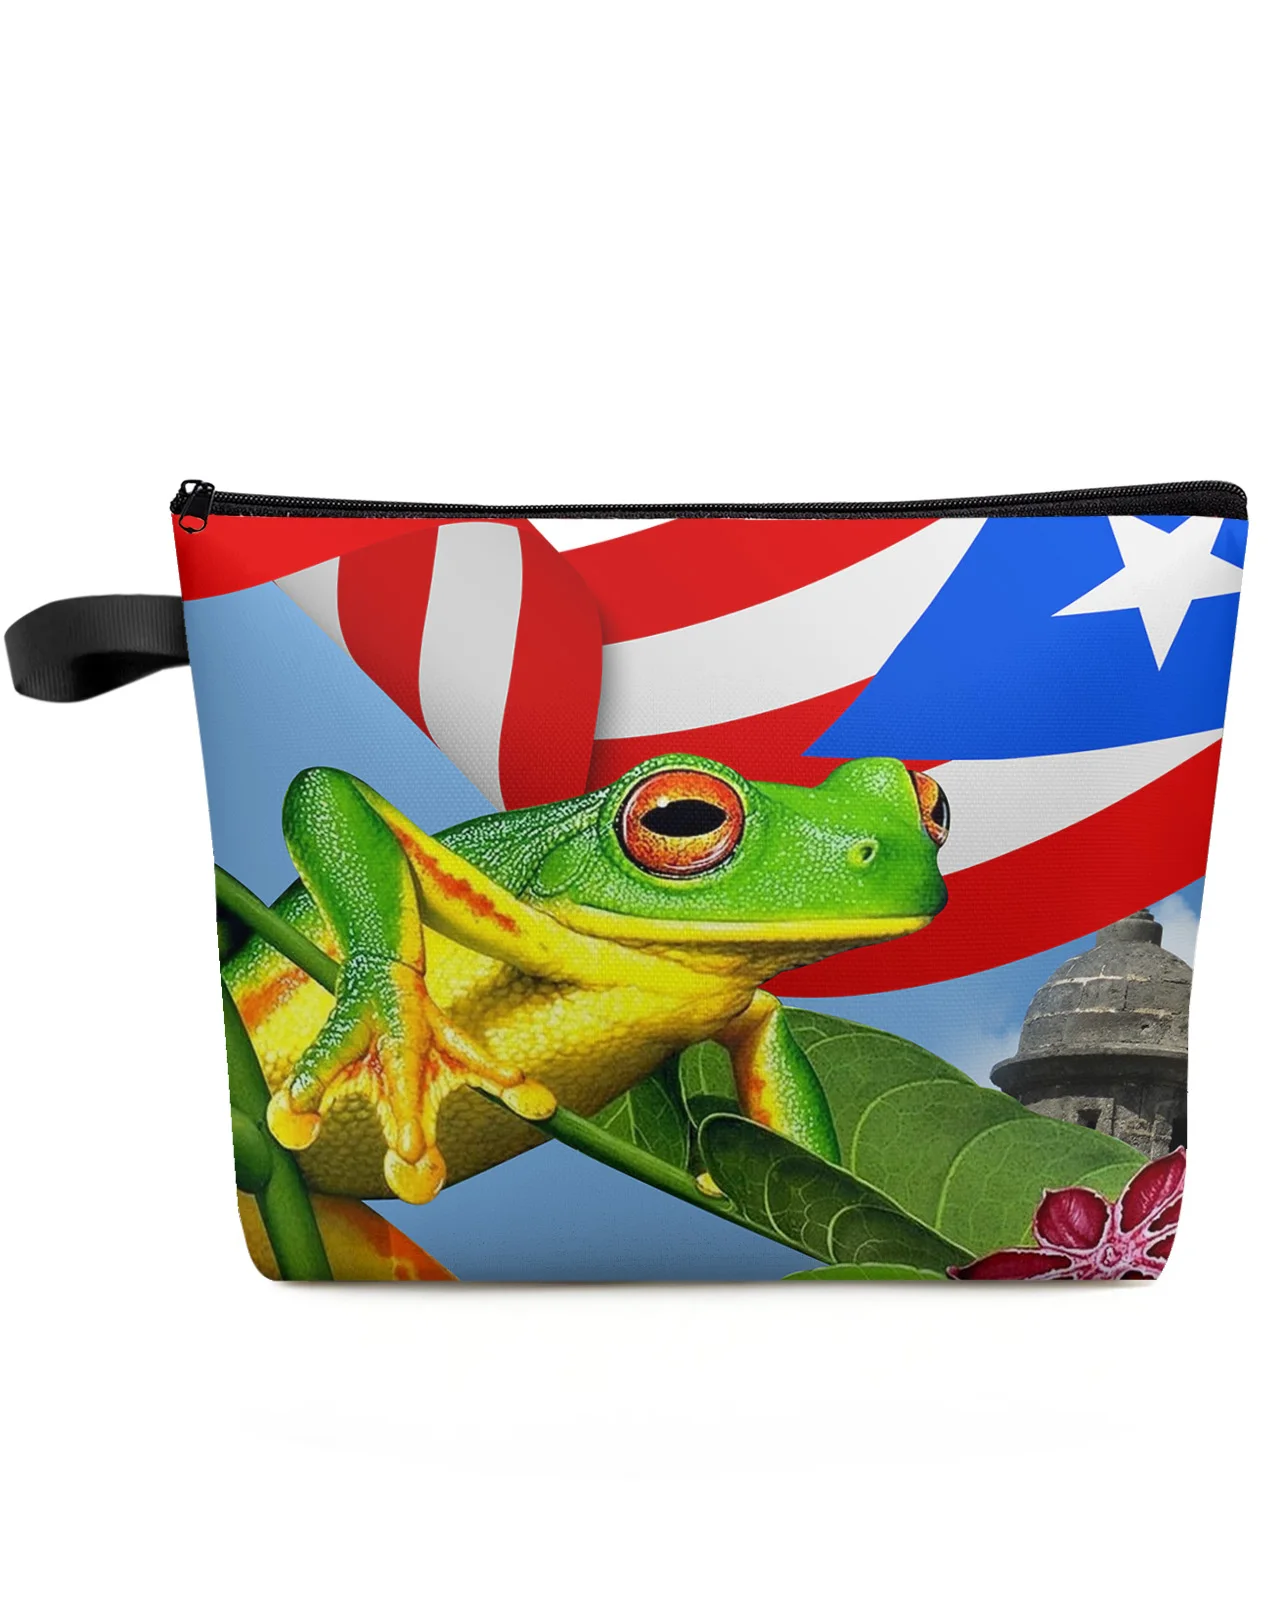 

Puerto Rico Red Eyed Tree Frog Makeup Bag Pouch Travel Essentials Lady Women Cosmetic Bags Toilet Organizer Storage Pencil Case